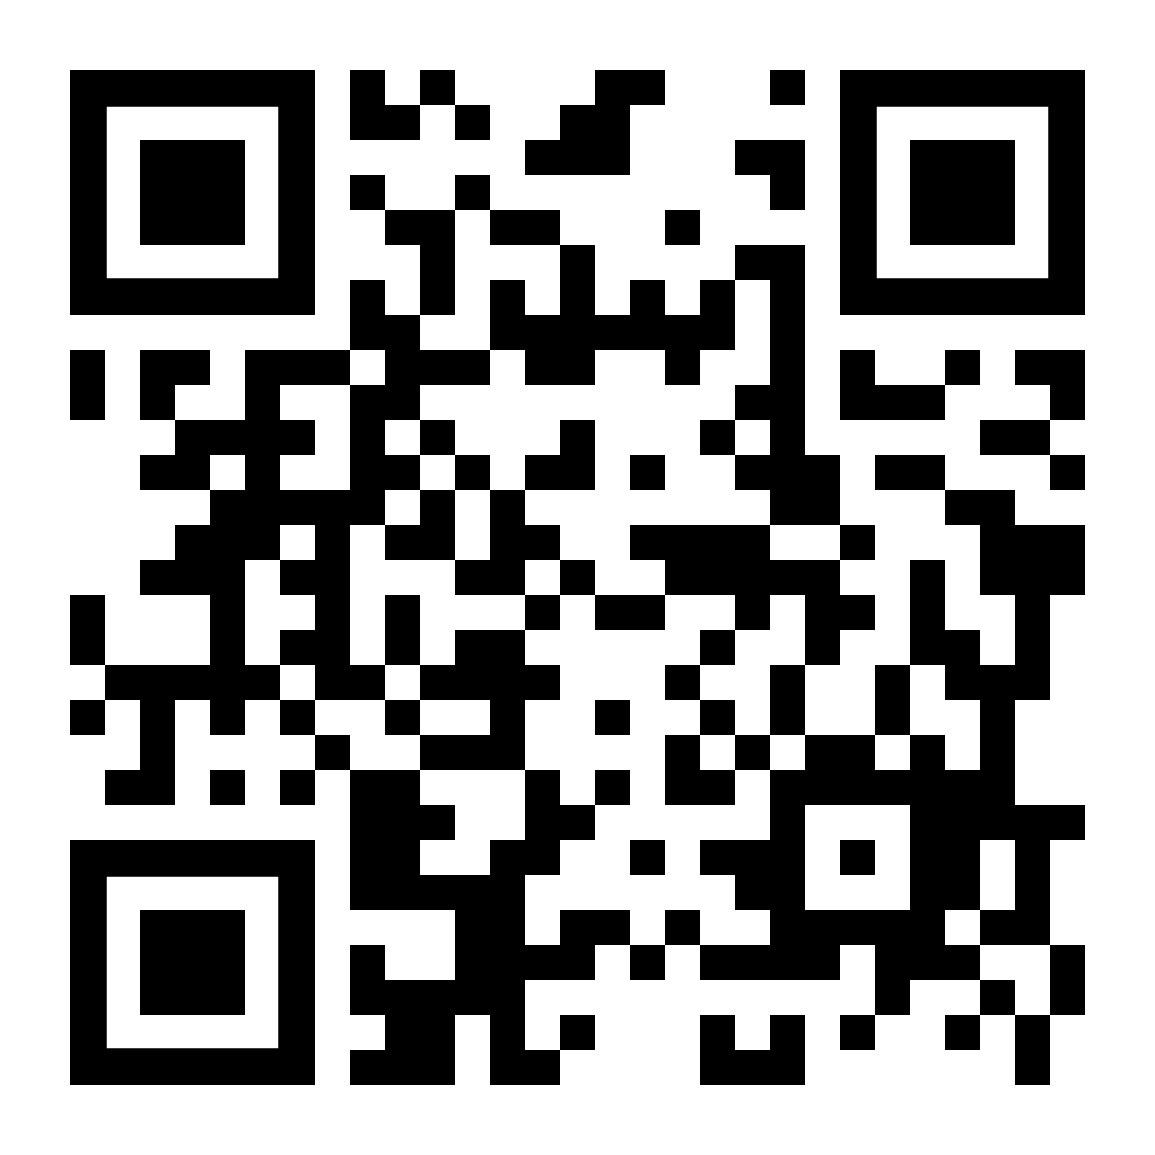 Tennis Leaders course - open to all Year 7-13 students across West Norfolk - email or scan the QR code to book a place - 11th April hosted @Lynnsport @ac_kes @SHSS_PE @KLA_PE @TNHA_PE @DMA_PE_Dept @Smithdon_High @StClements @MarshlandHS @KingsLynnLive @GlebeHouseSch @YLPSport